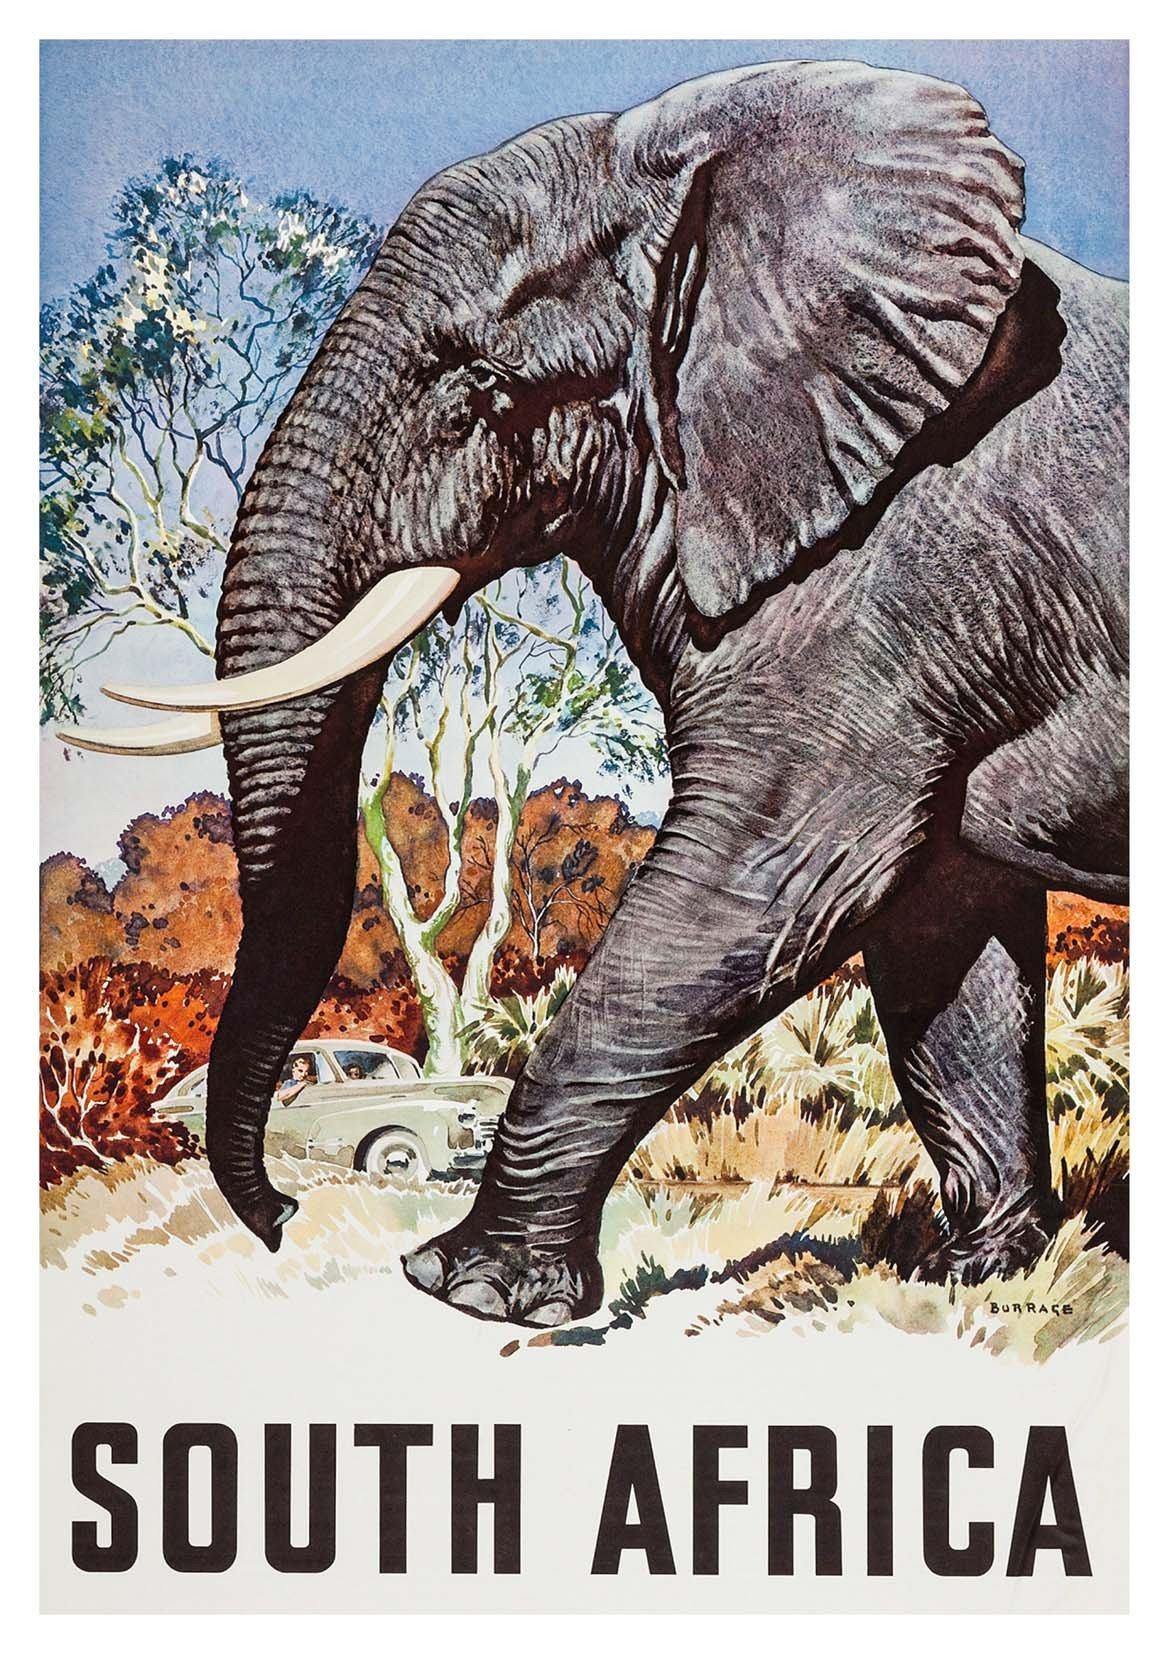 AFRICAN ELEPHANT POSTER: South Africa Travel Print - Pimlico Prints